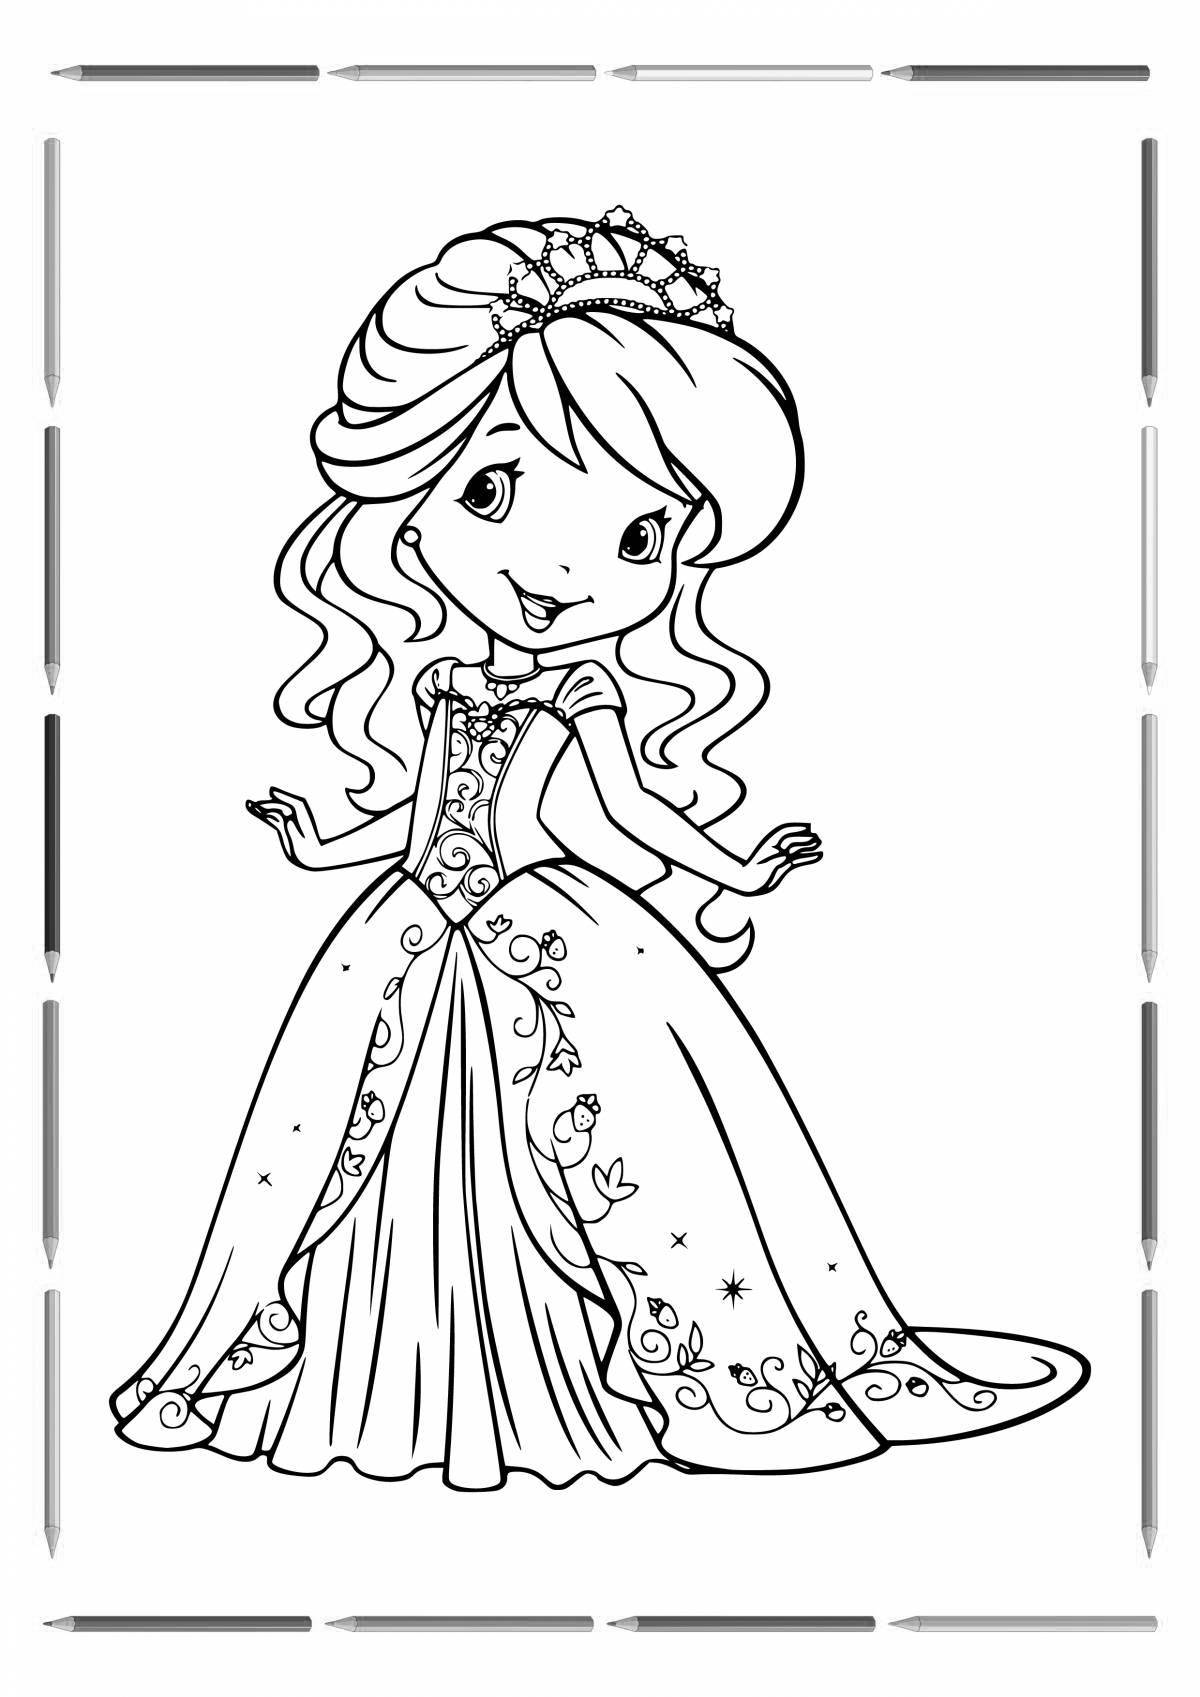 Luxury princess coloring pages